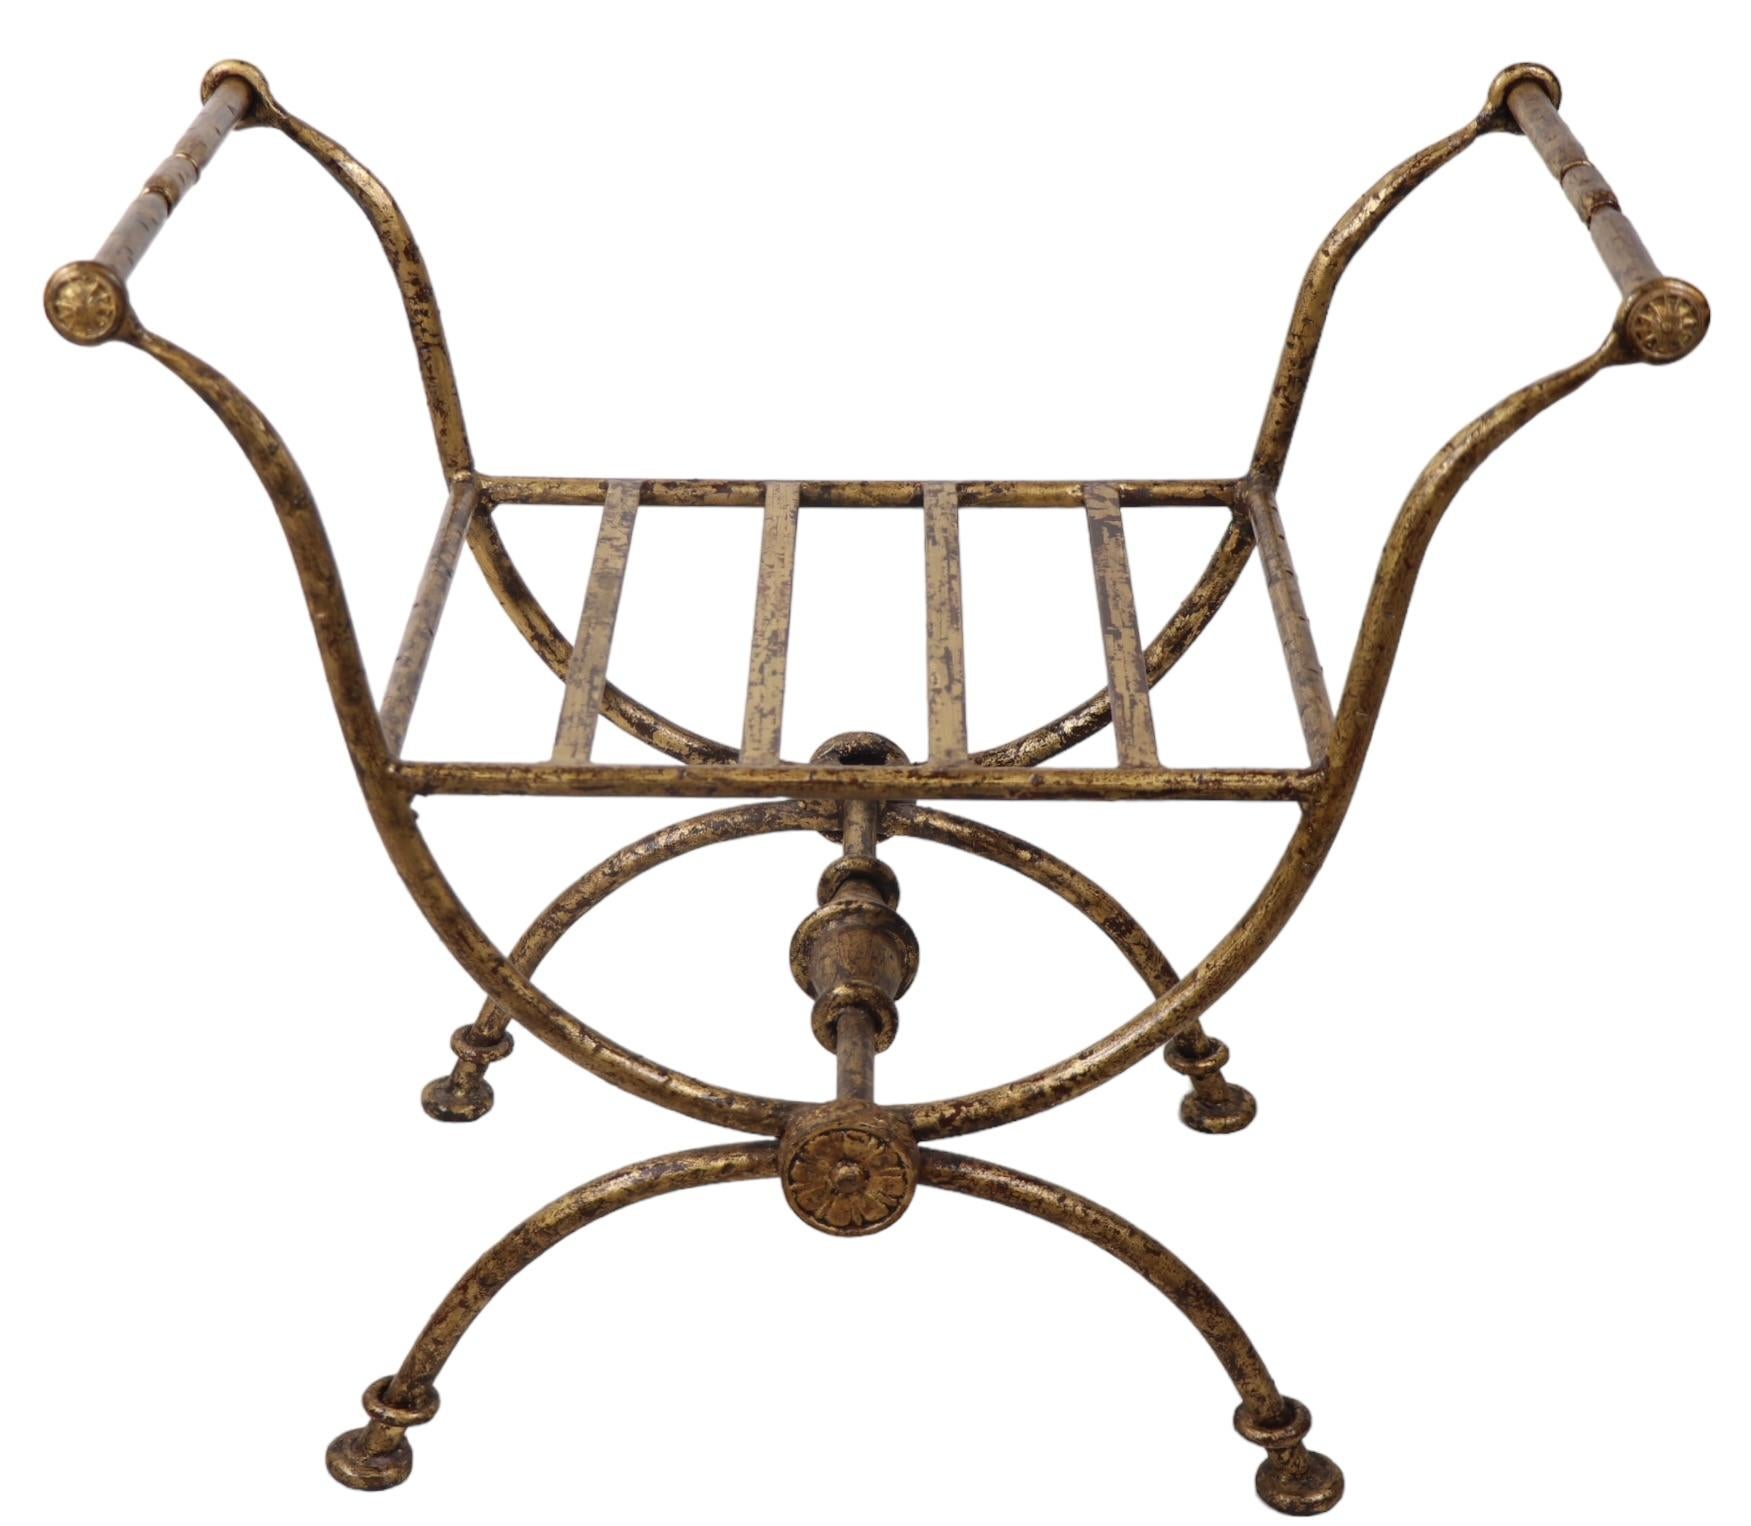 Italian Wrought Iron Vanity Widow Bench in Faux Gilt Finish c 1940/1960's  For Sale